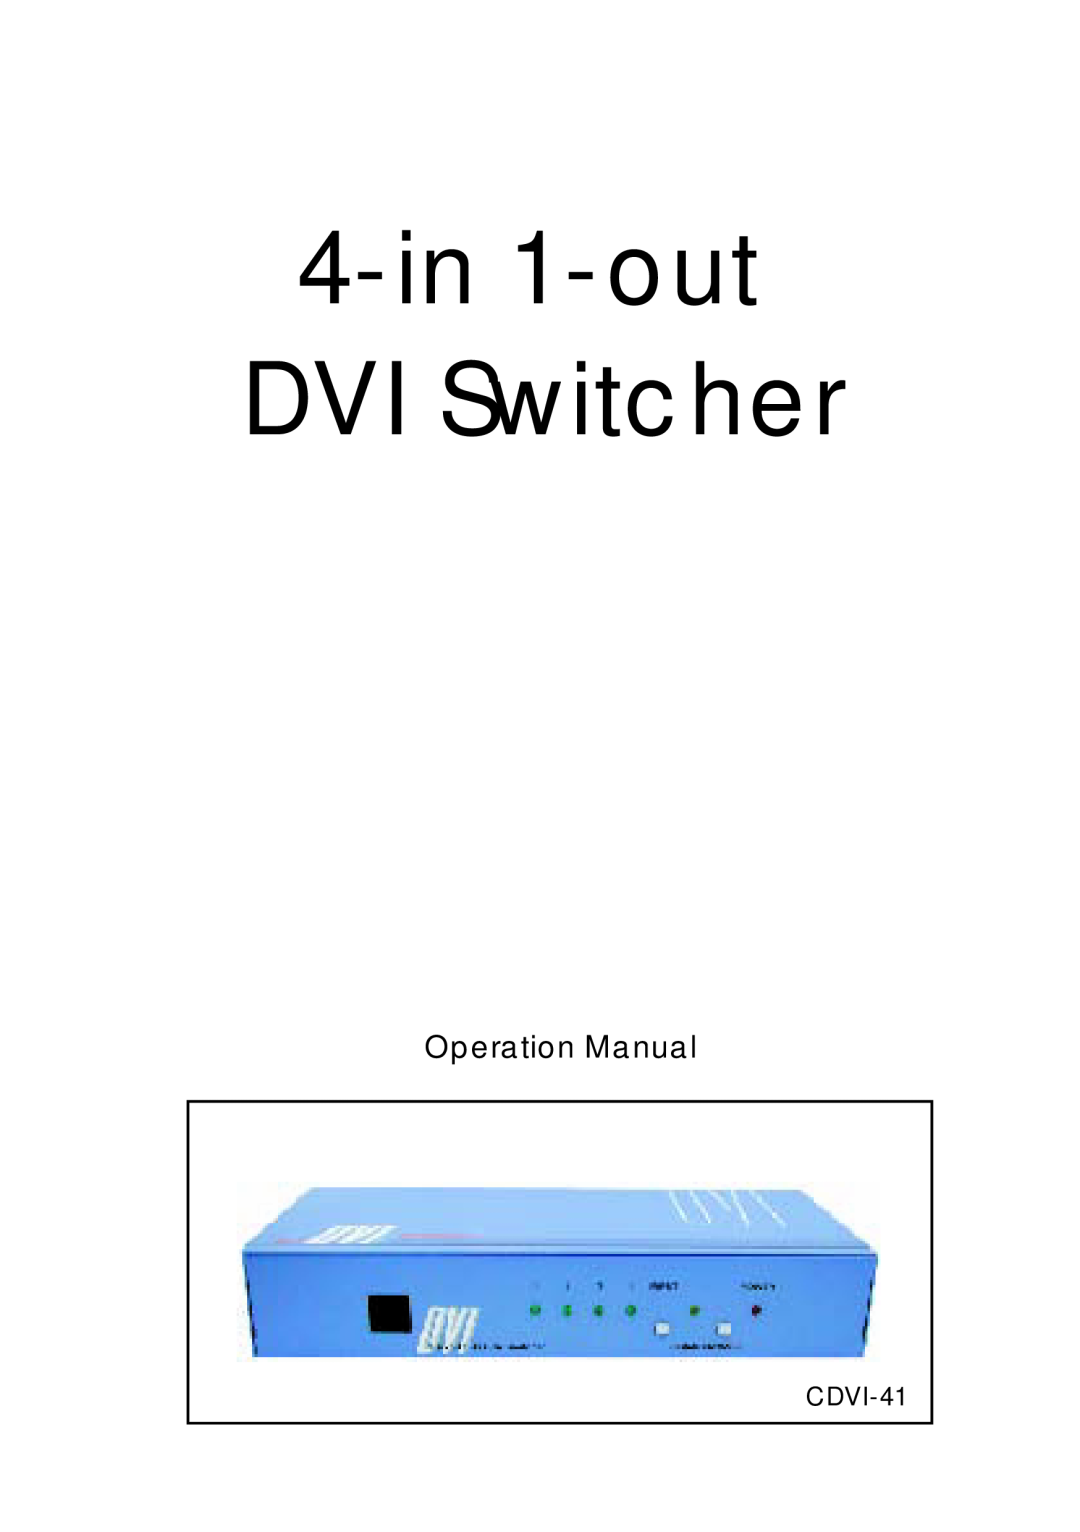 Video Products SE-DVI-4-LC operation manual Operation Manual, CDVI-41, 4-in 1-out DVI Switcher 